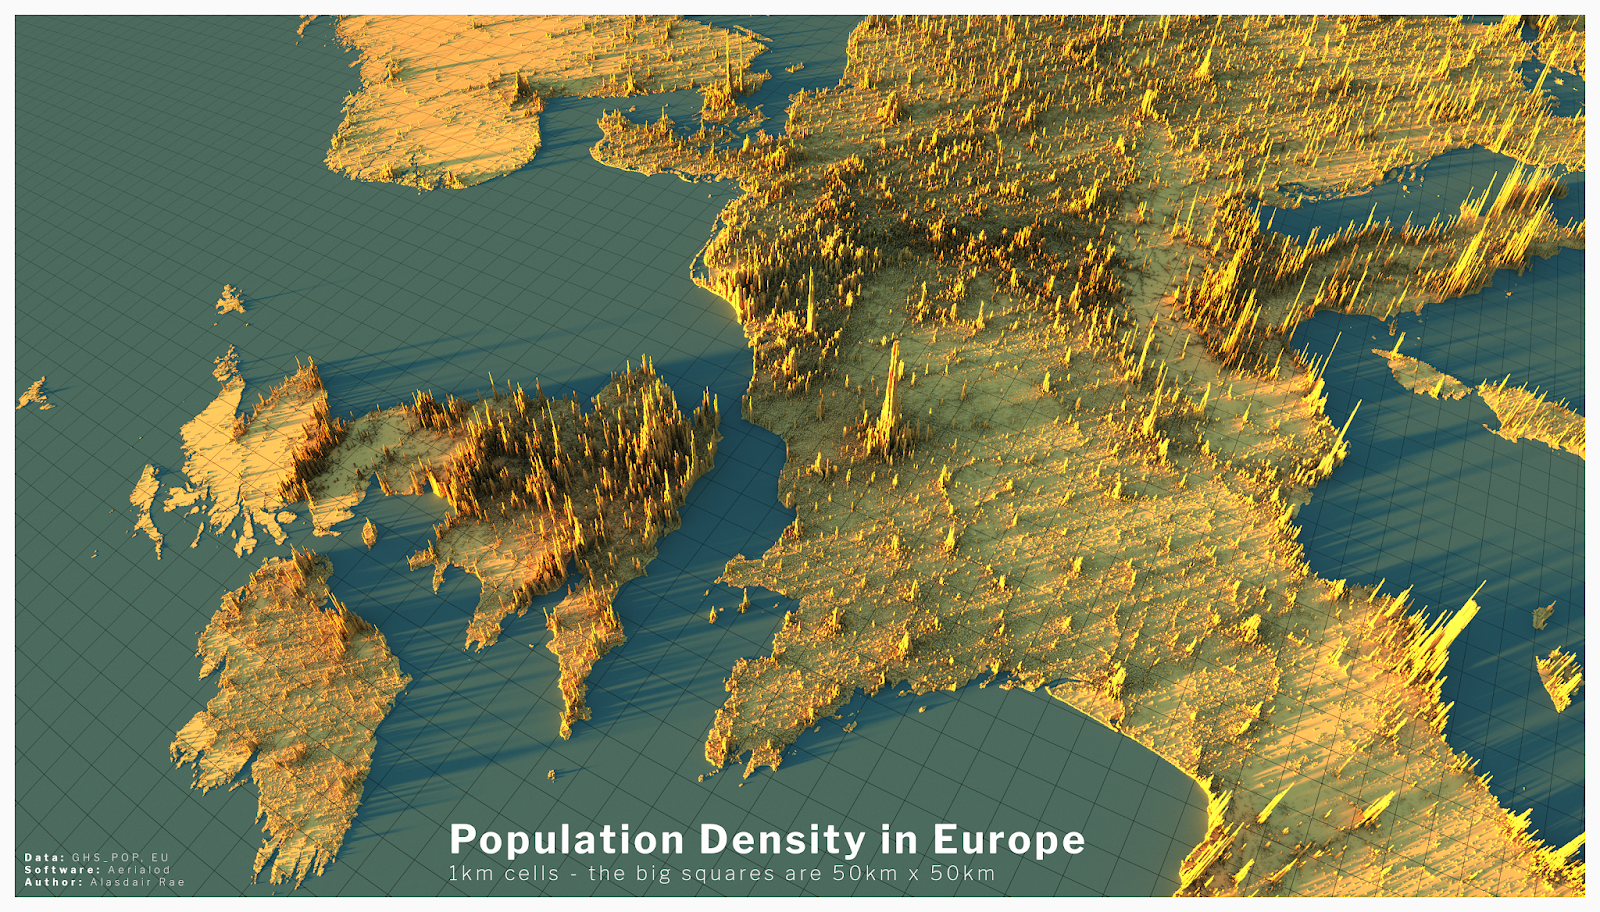 A 3d map showing population density across Europe